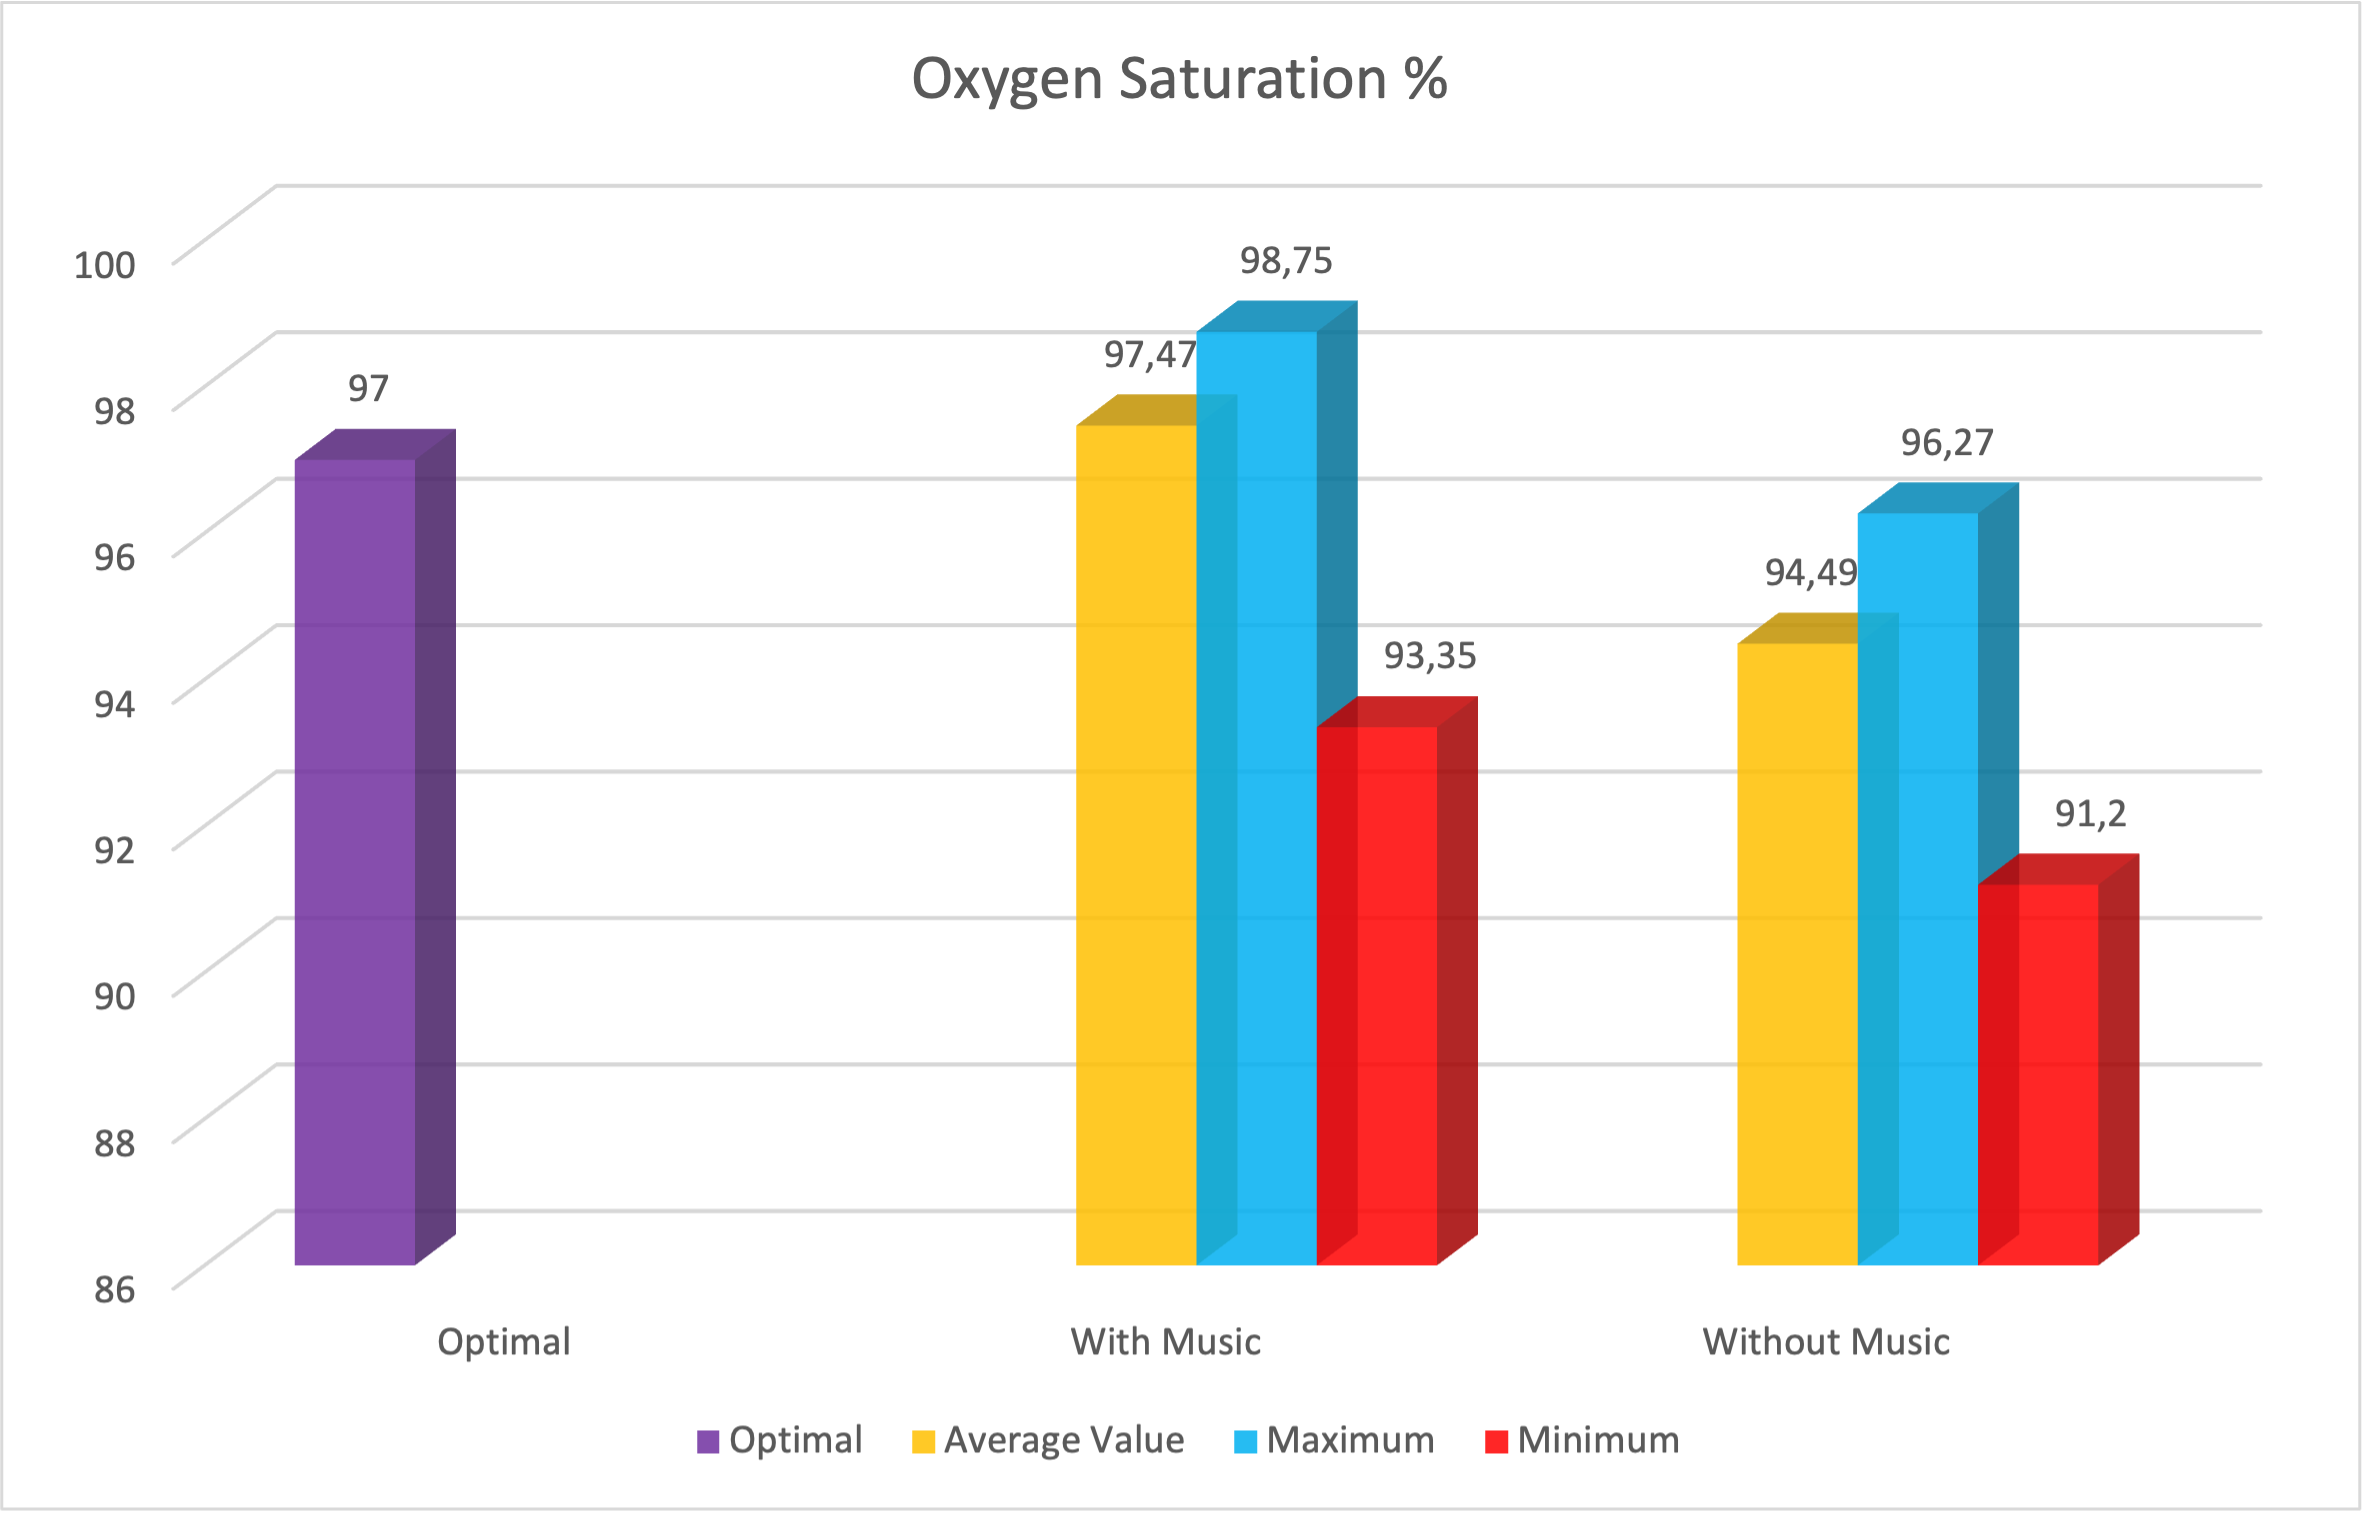 This graphs shows the oxygen saturation levels of premature babies with music therapy and without music.